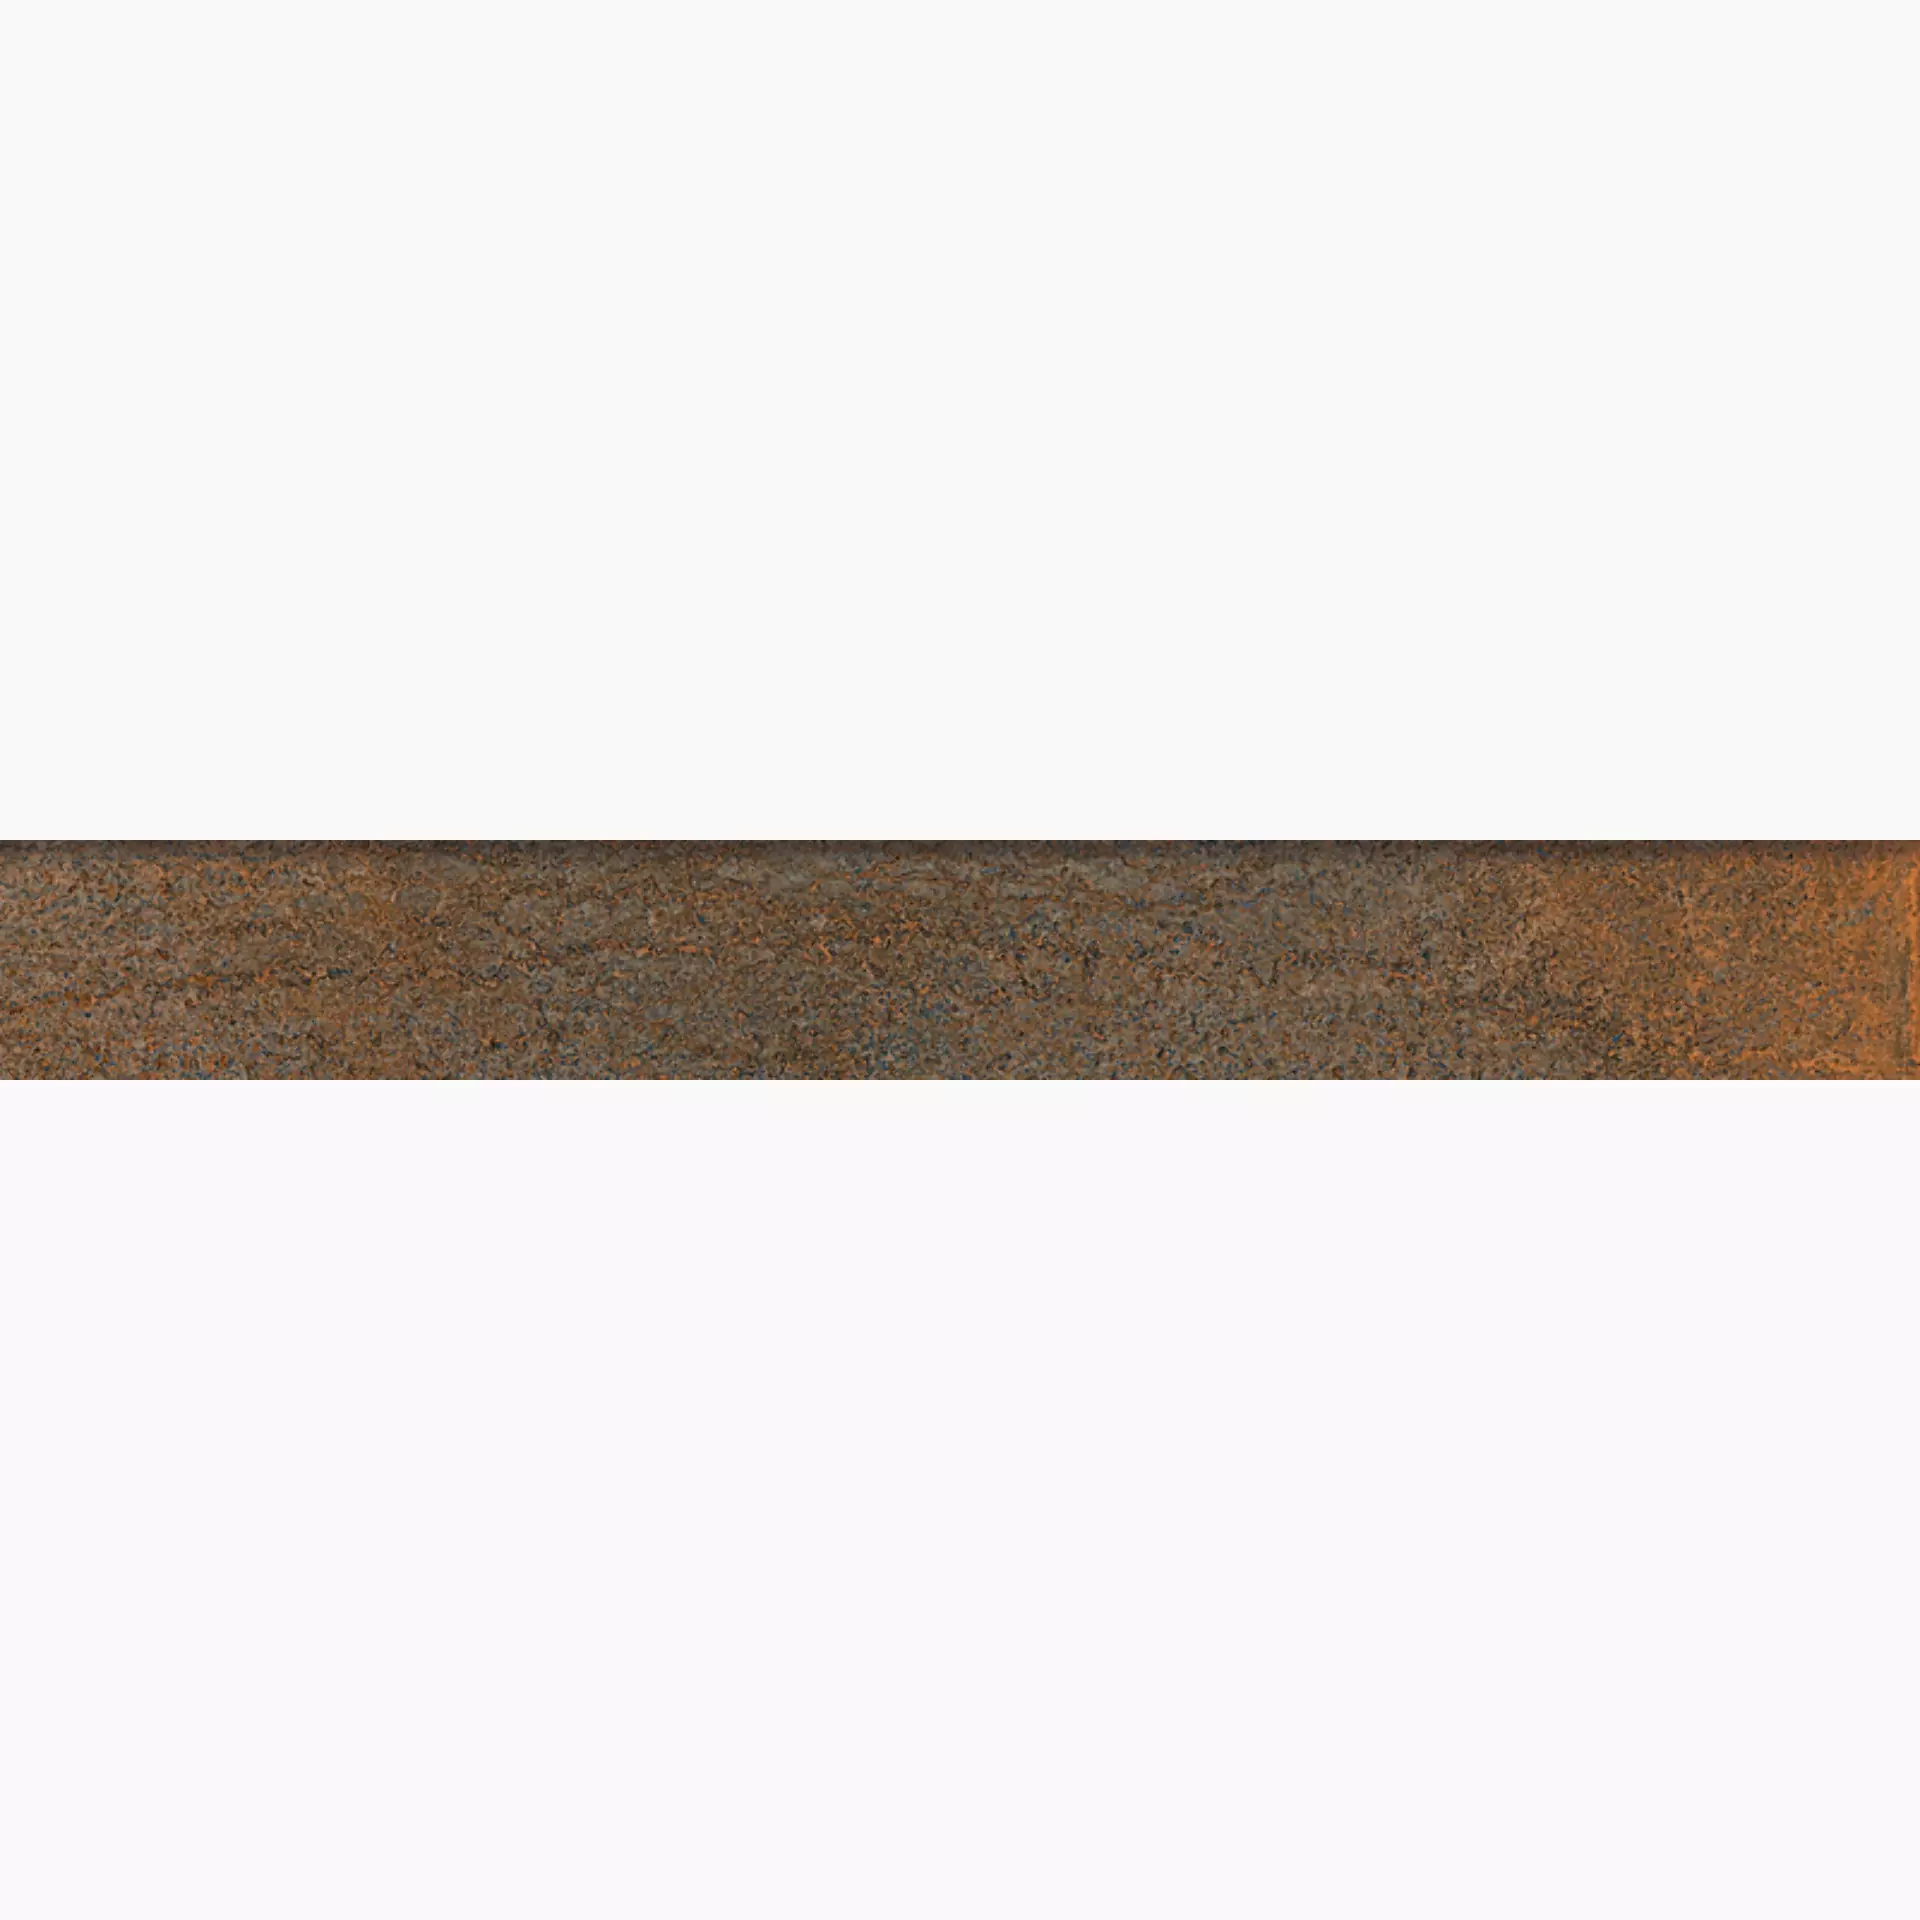 Sant Agostino Oxidart Copper Natural Skirting board CSABOXCO60 7,3x60cm rectified 10mm